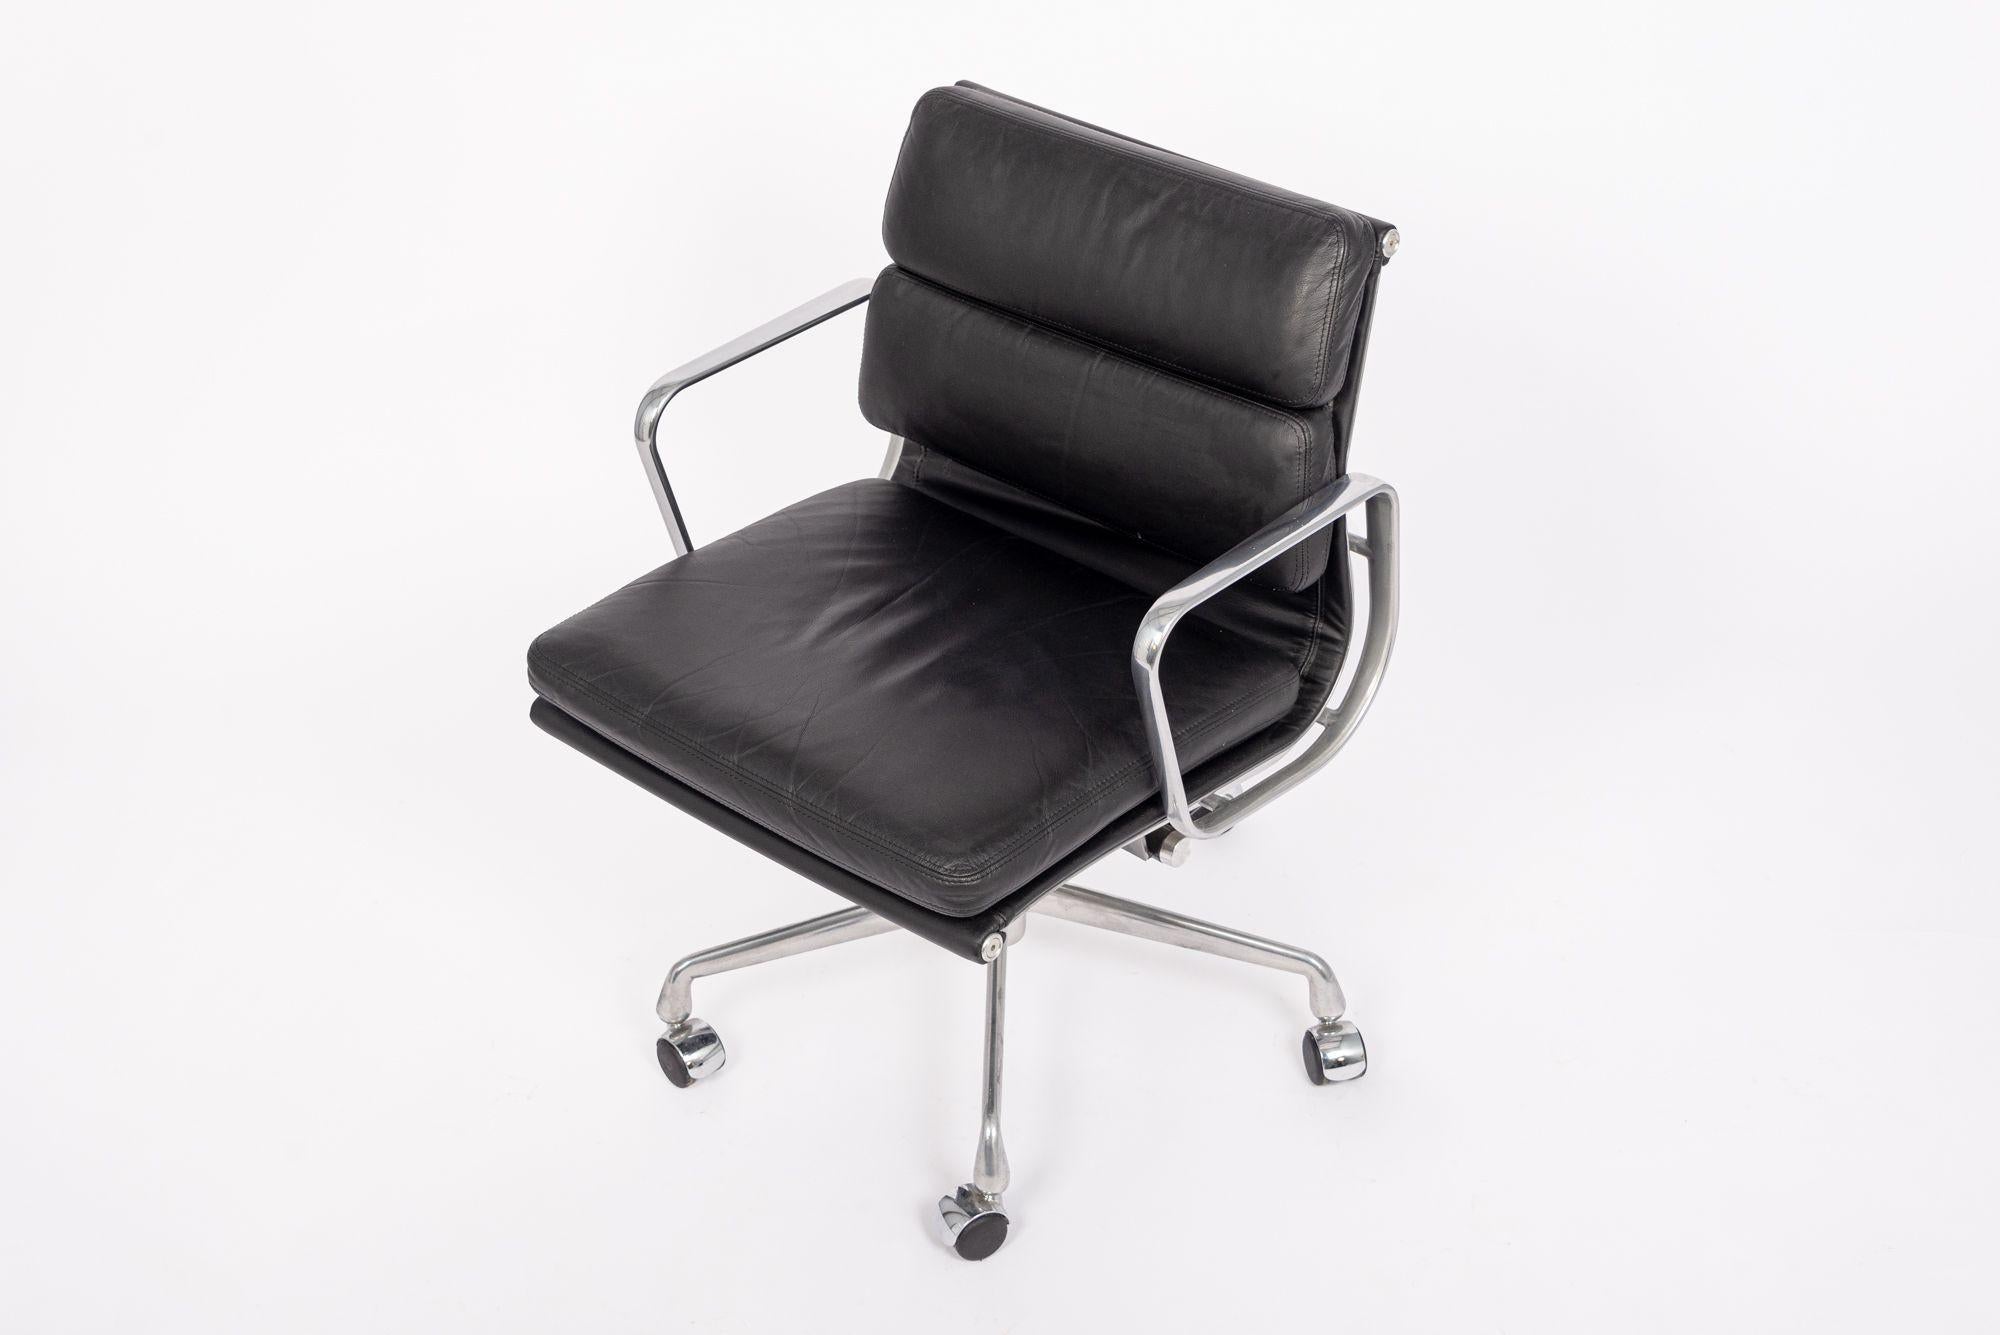 2001 Eames Herman Miller Black Leather Desk Chairs Aluminum Group For Sale 2